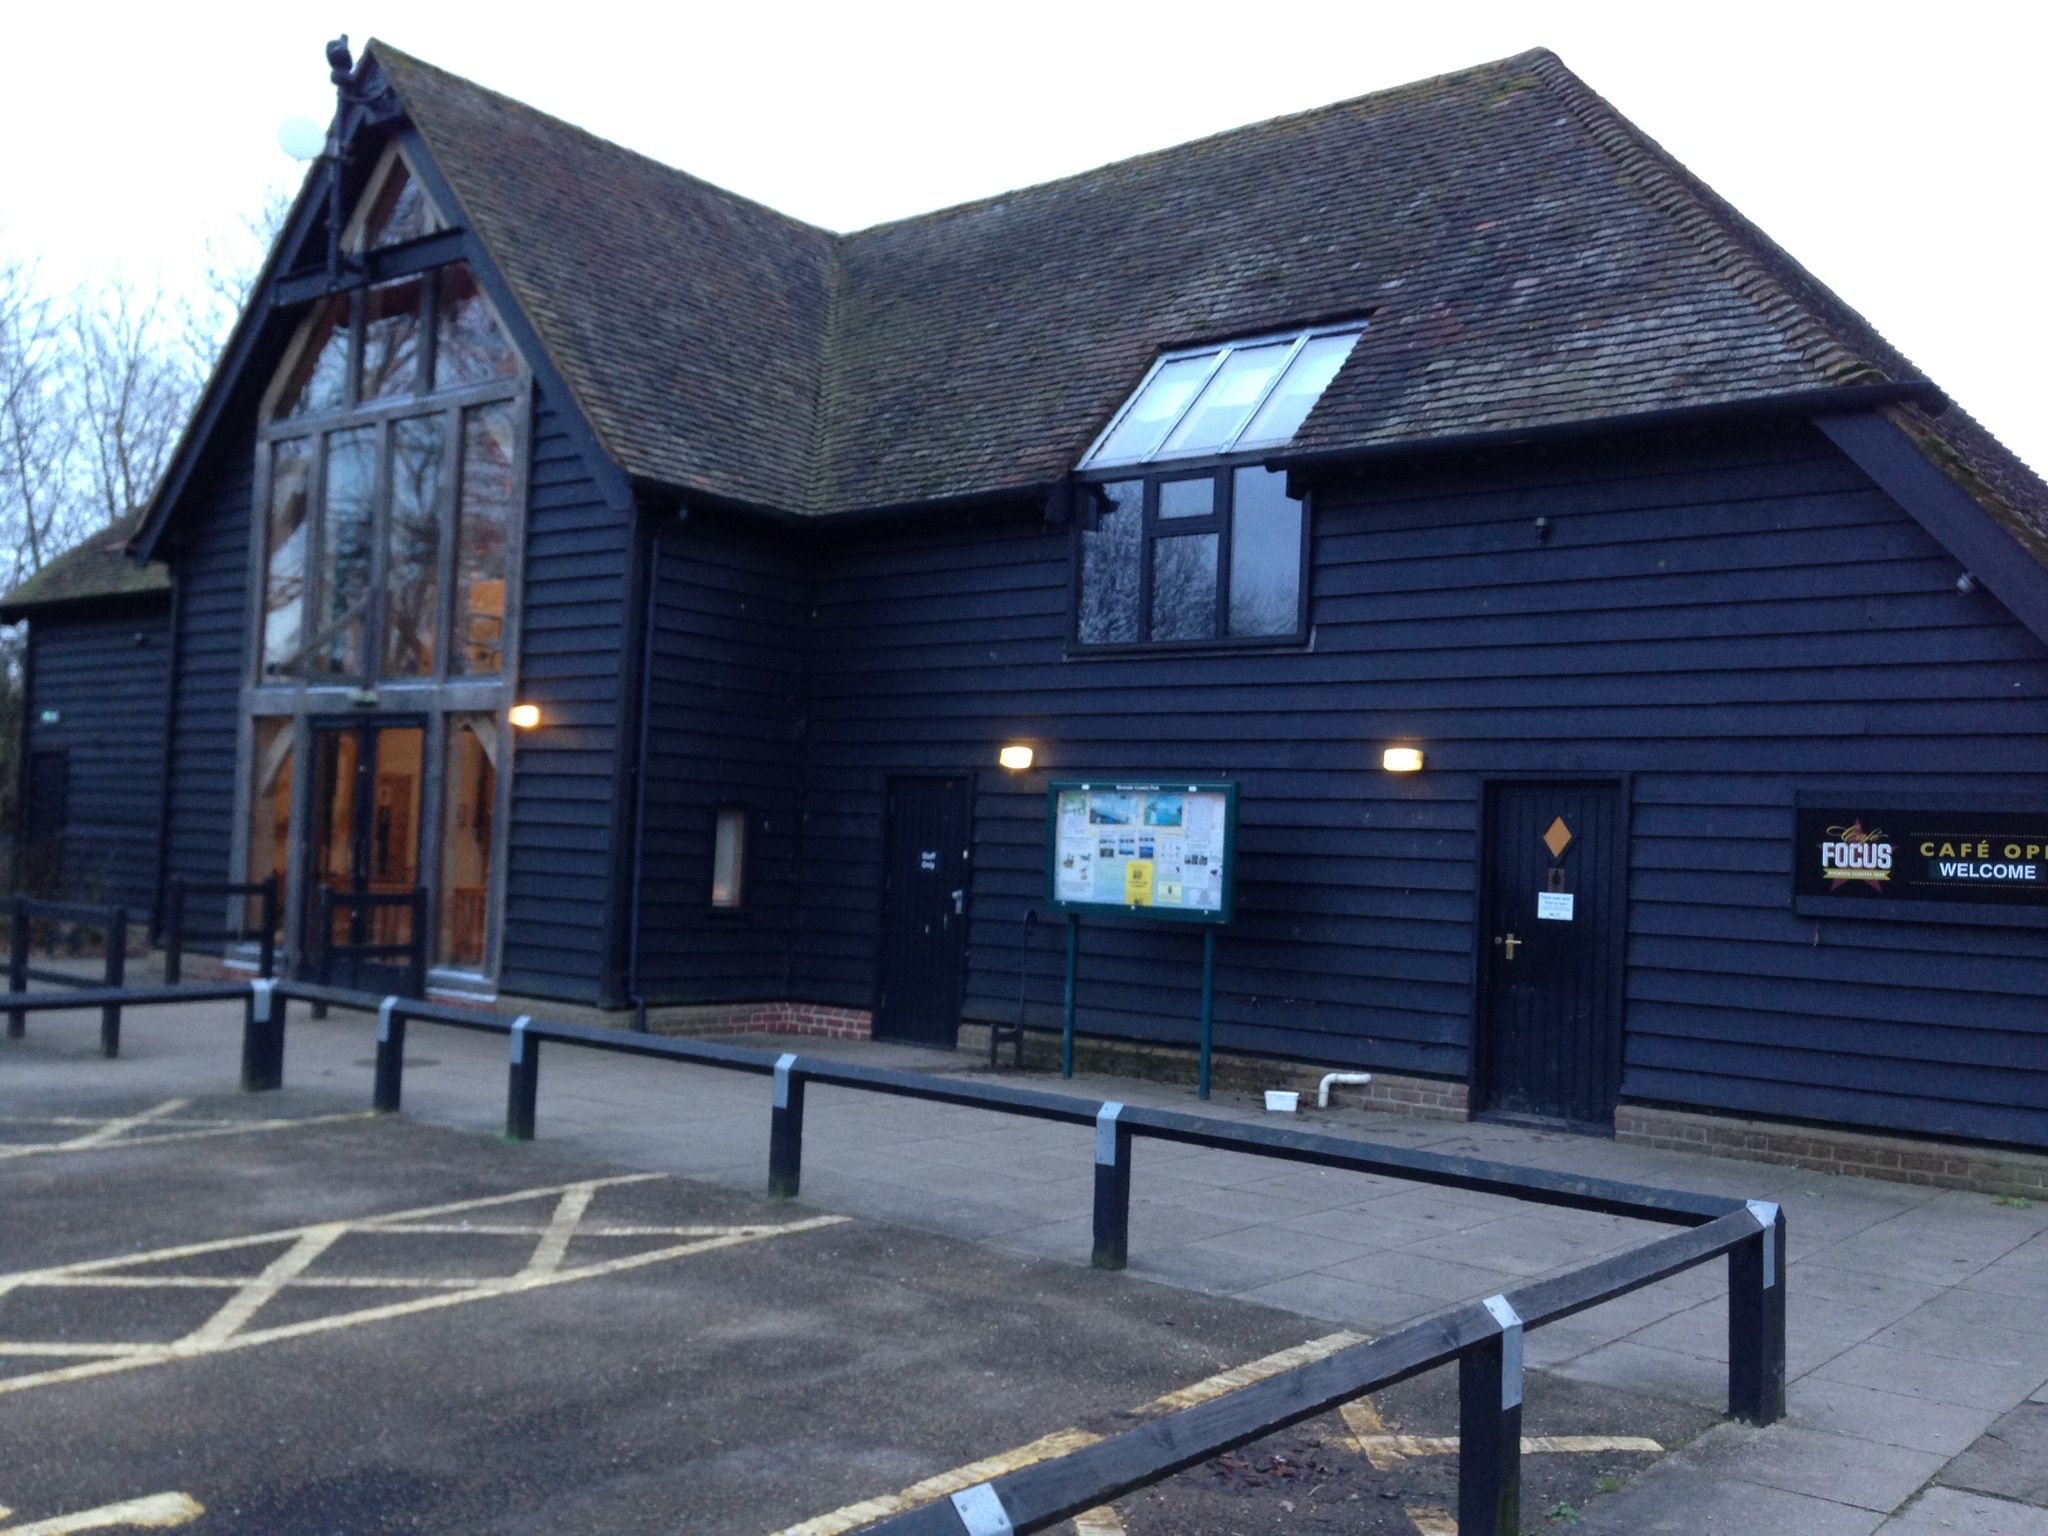 Riverside Country Parks Focus Cafe and Visitors Centre building